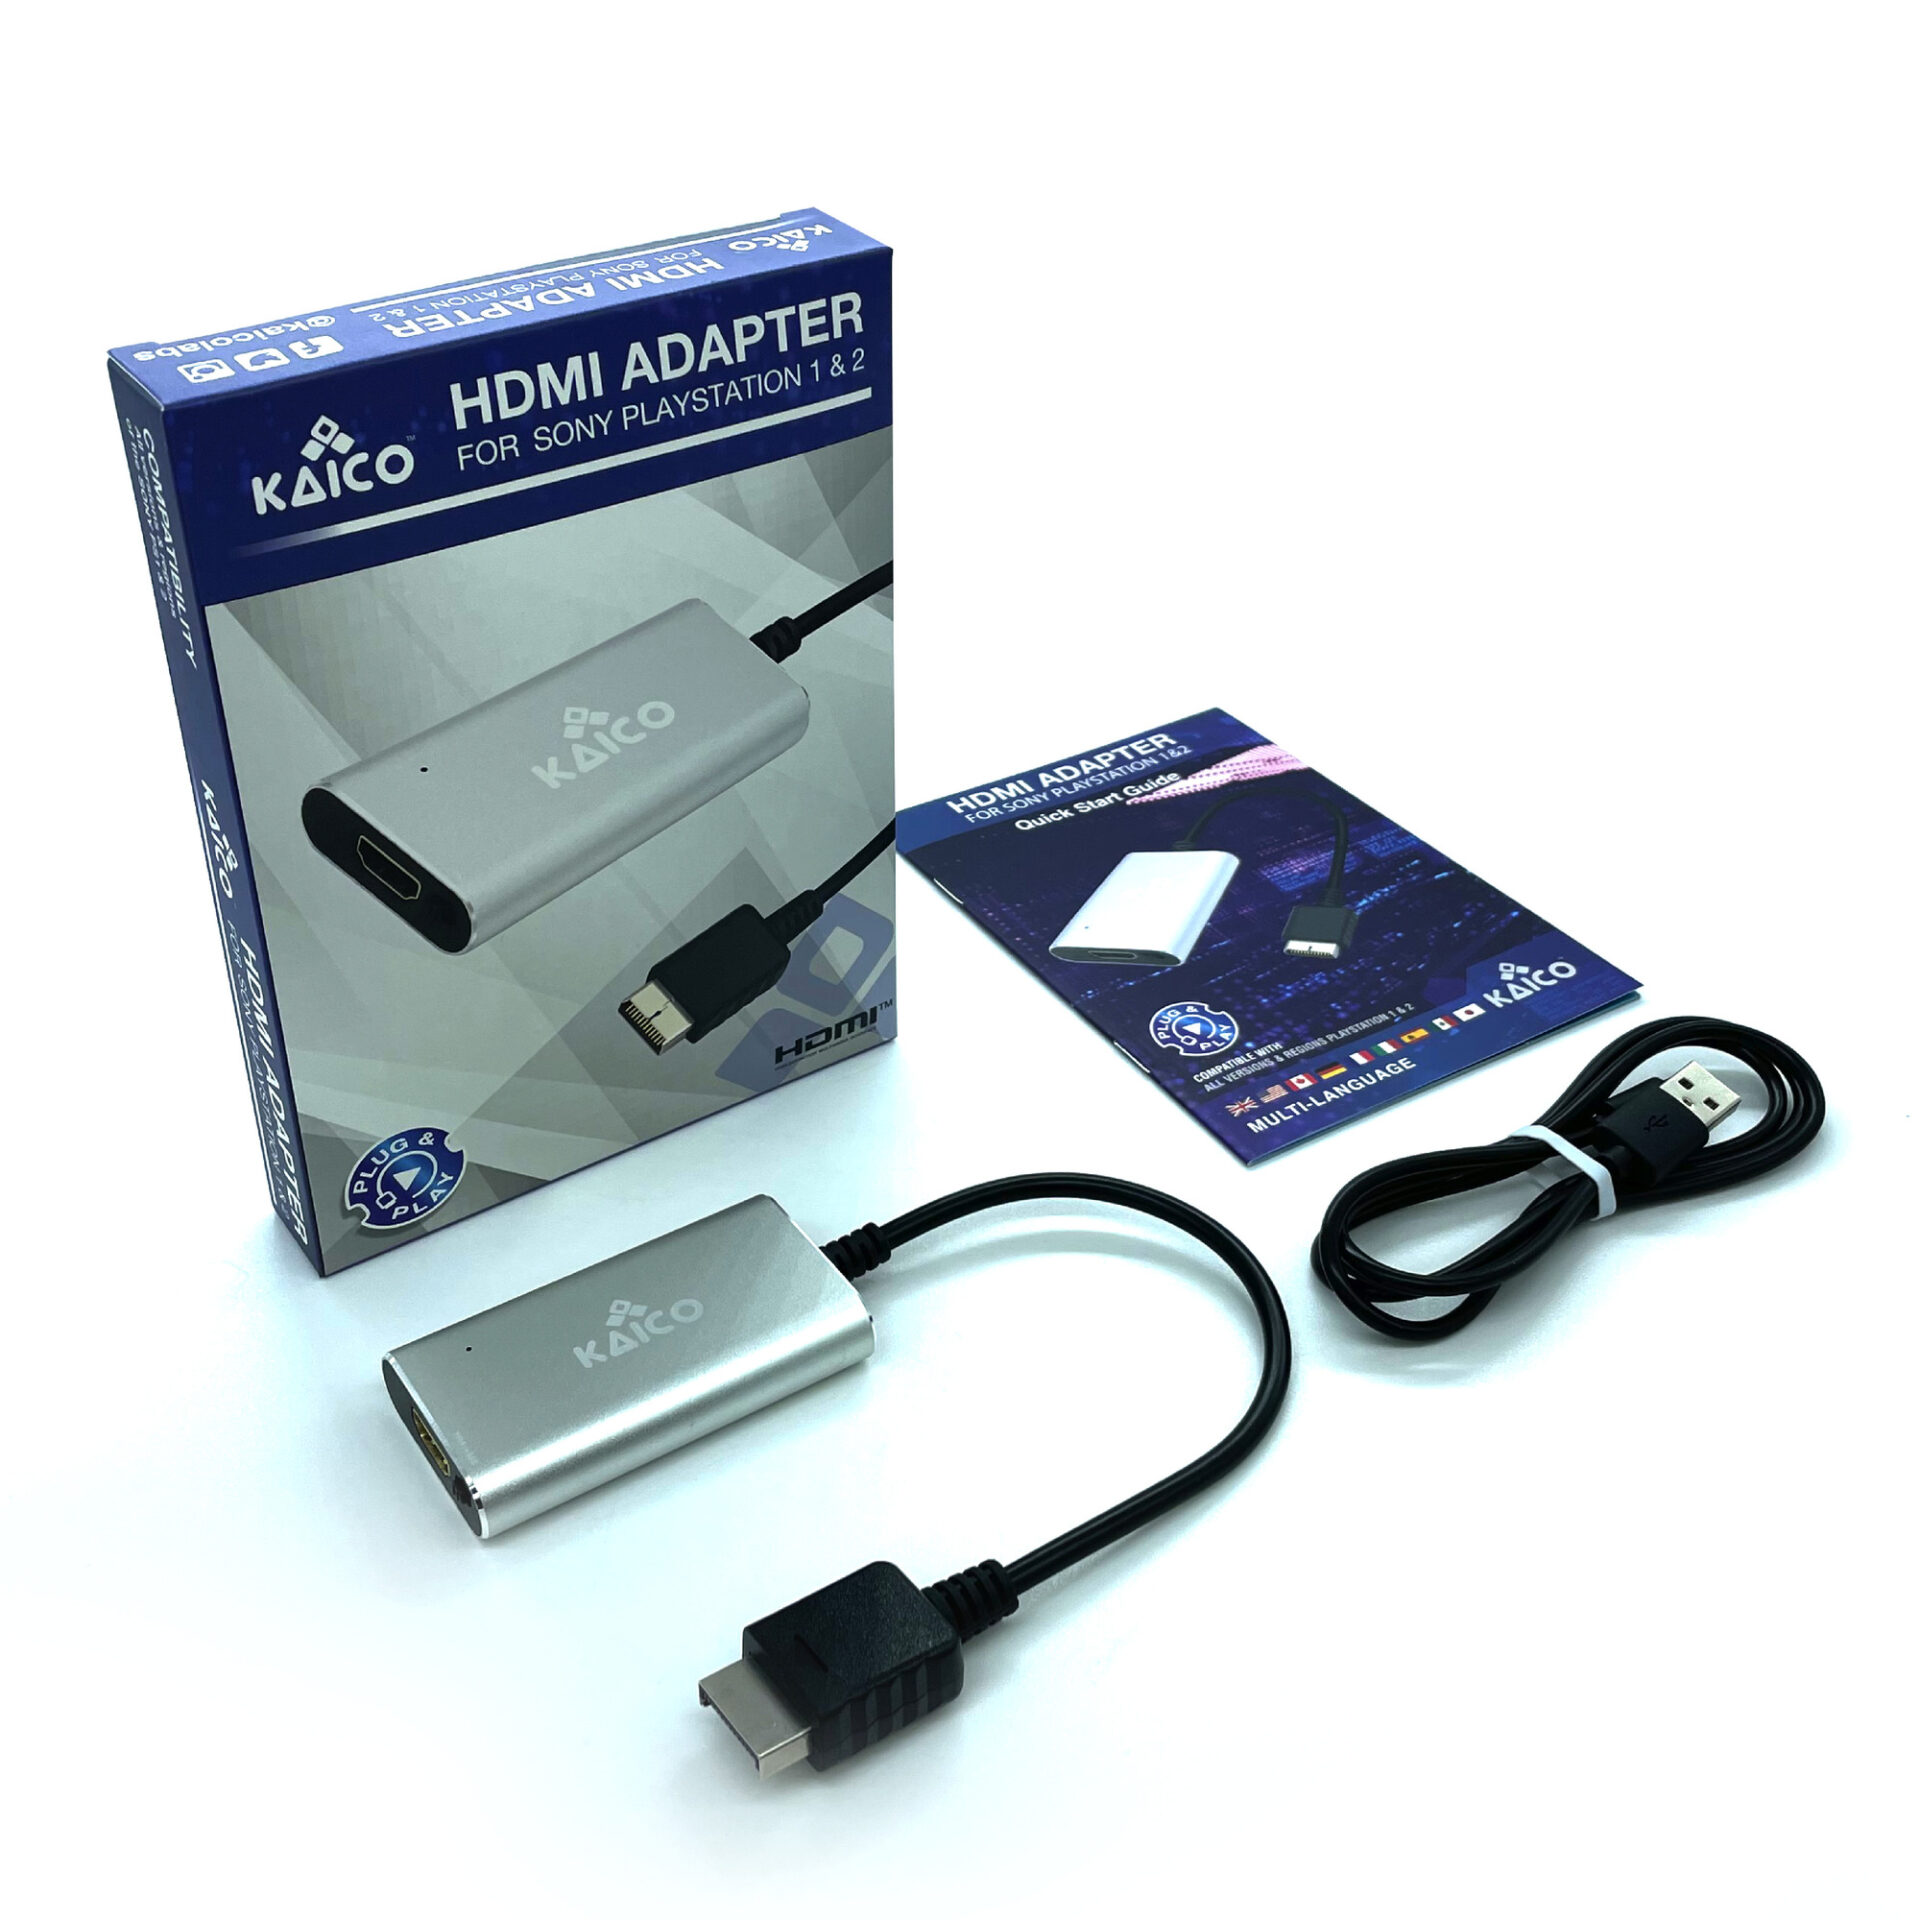 PS2 HDMI Adapter , HDMI Converter for PS1/PS2 with True RGB Signal Output  in 720p/1080p Resolution